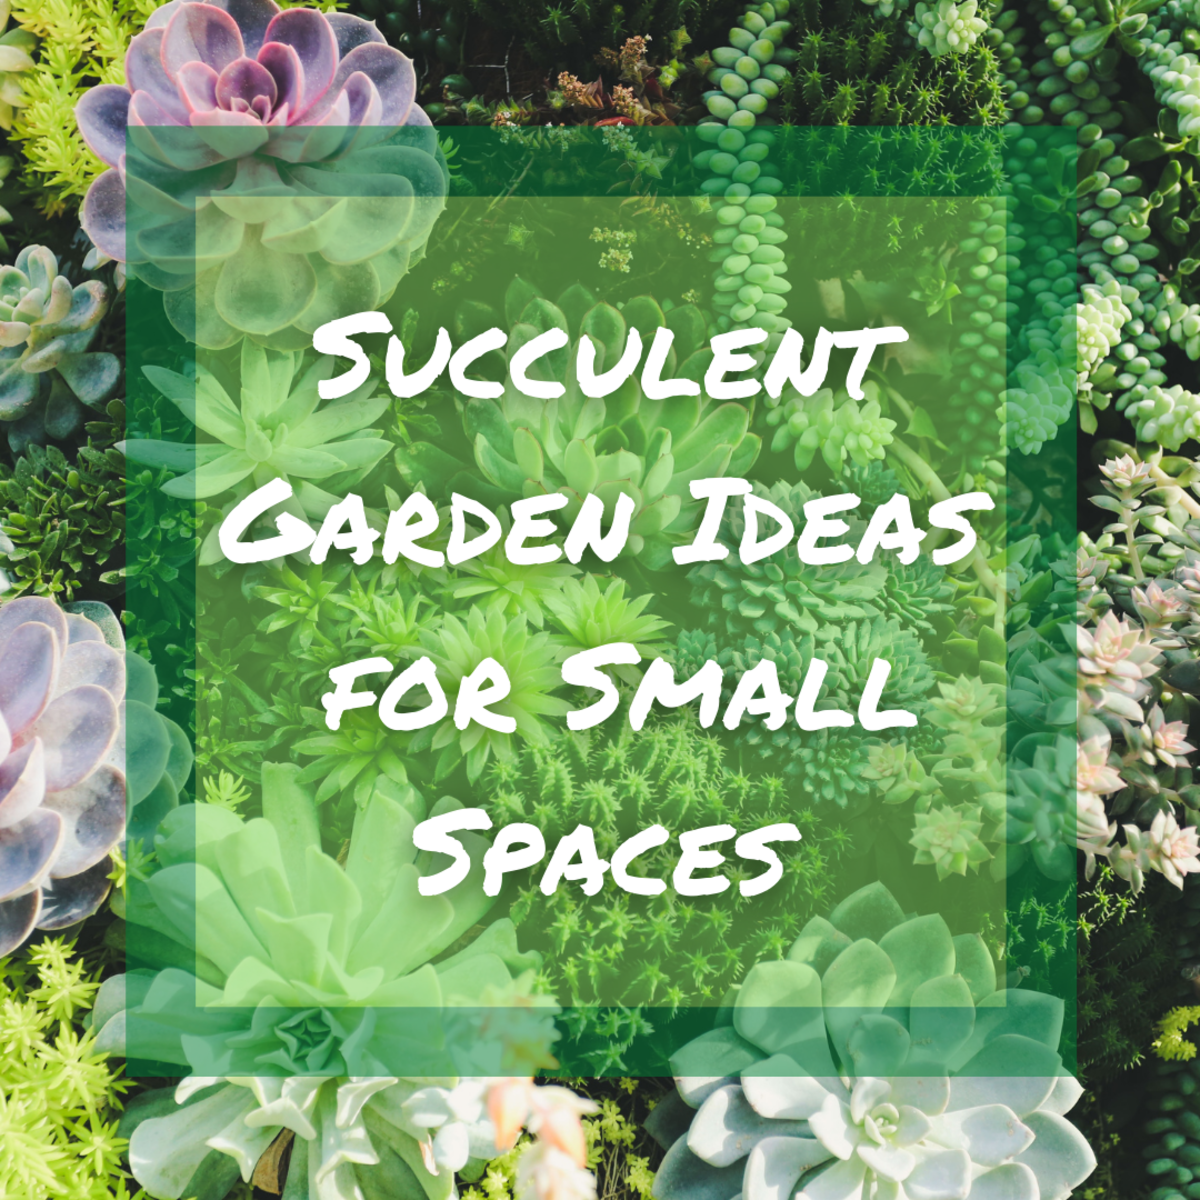 Succulent Gardens for Small Spaces